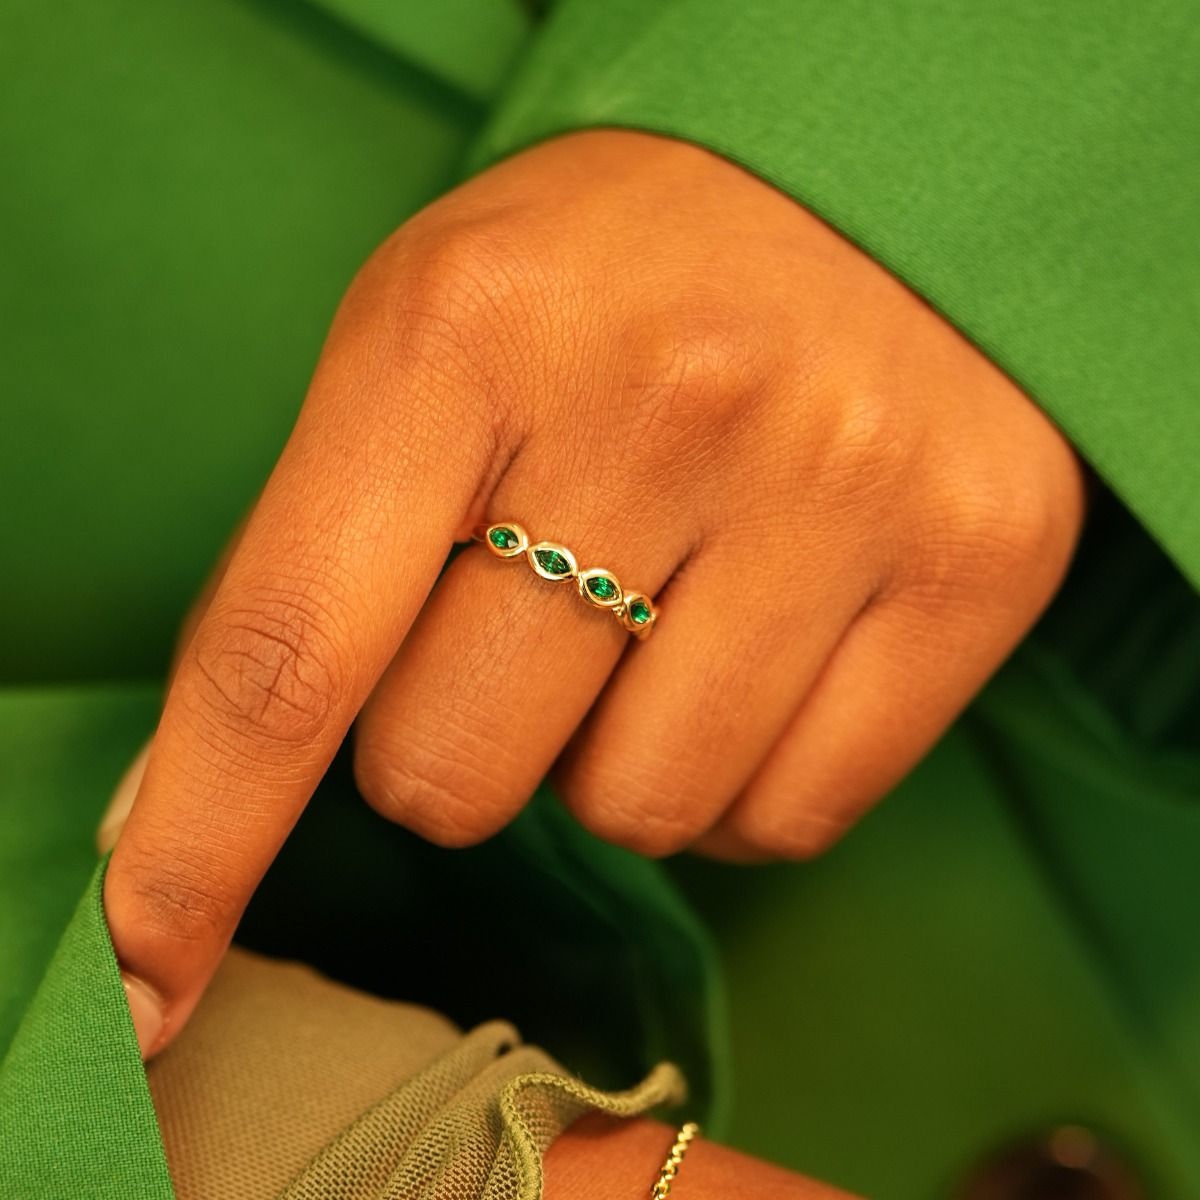 The Stacking Ring flaunts a delicate band adorned with encased marquise stones. Its versatility lends it the ability to stand out as a statement piece or be customised by pairing with complementary rings.